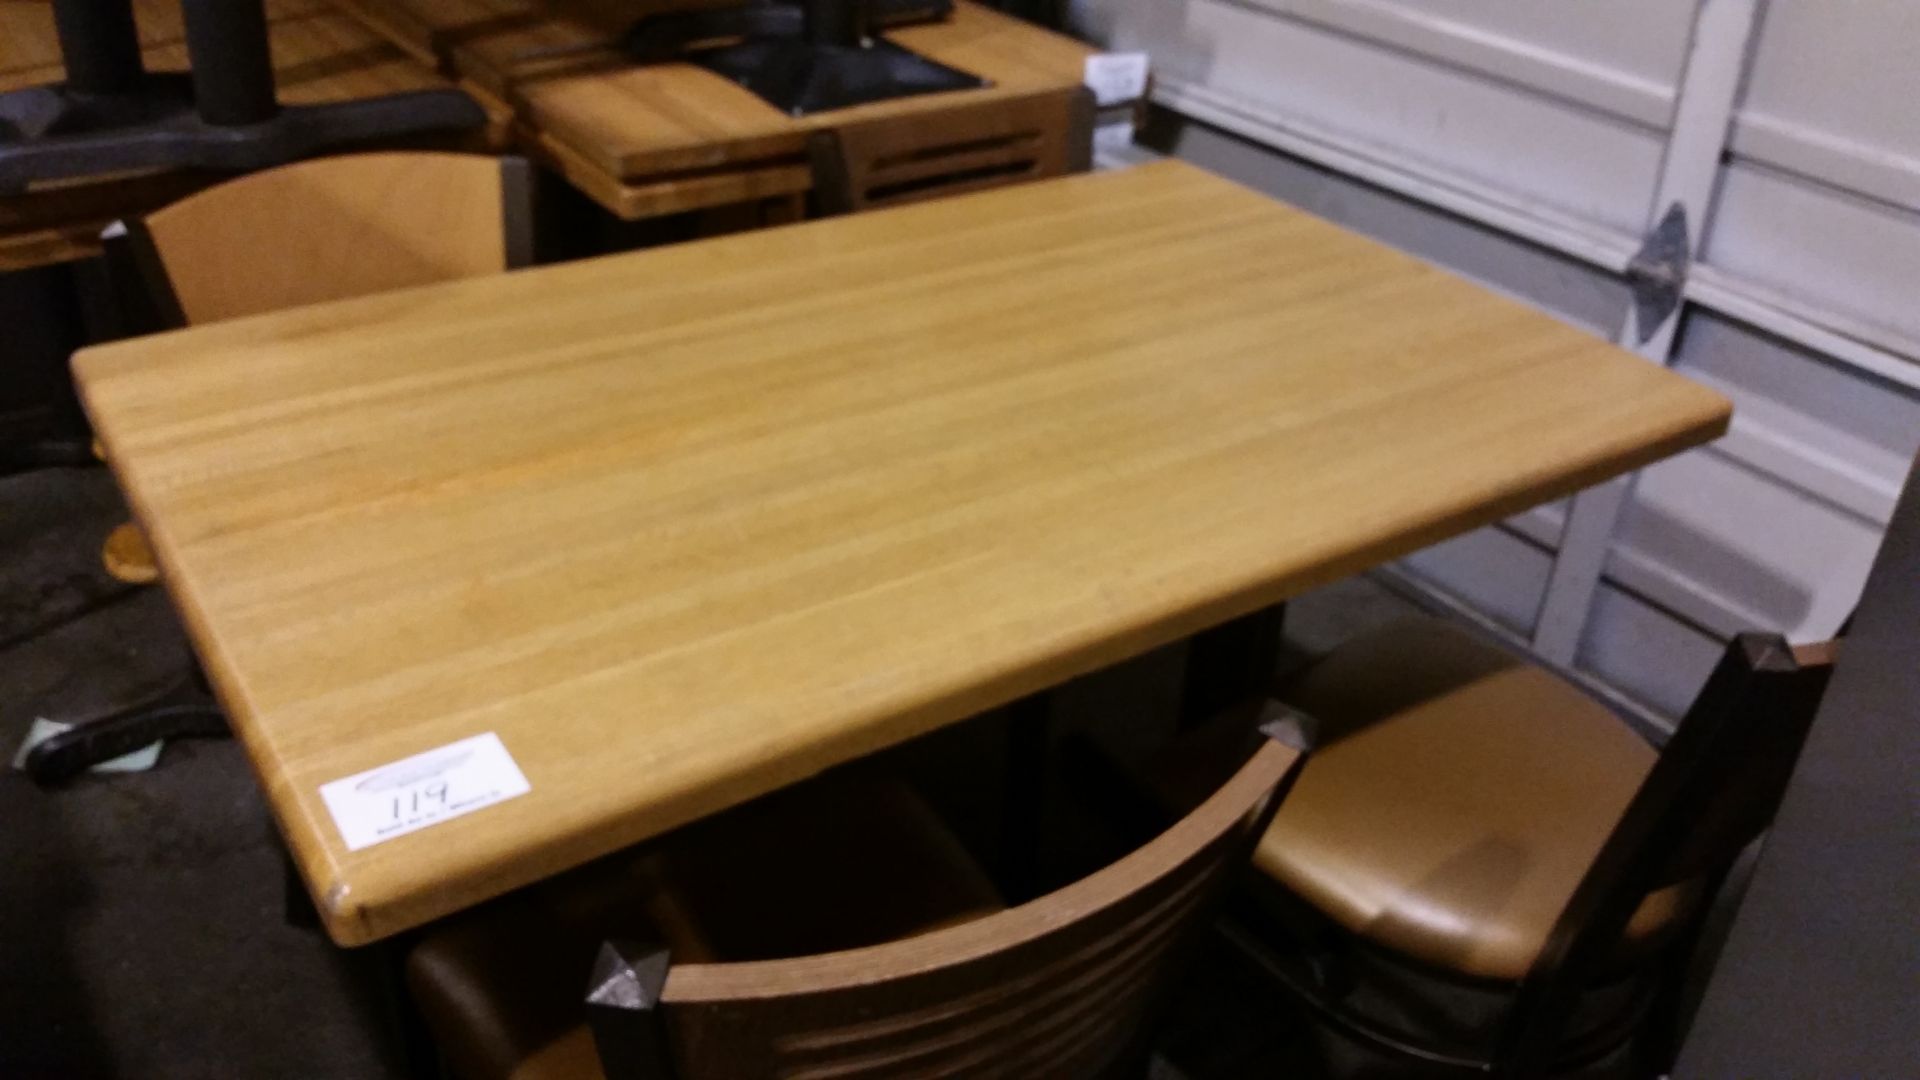 30 x 48" Oak top table with 4 metal padded chairs